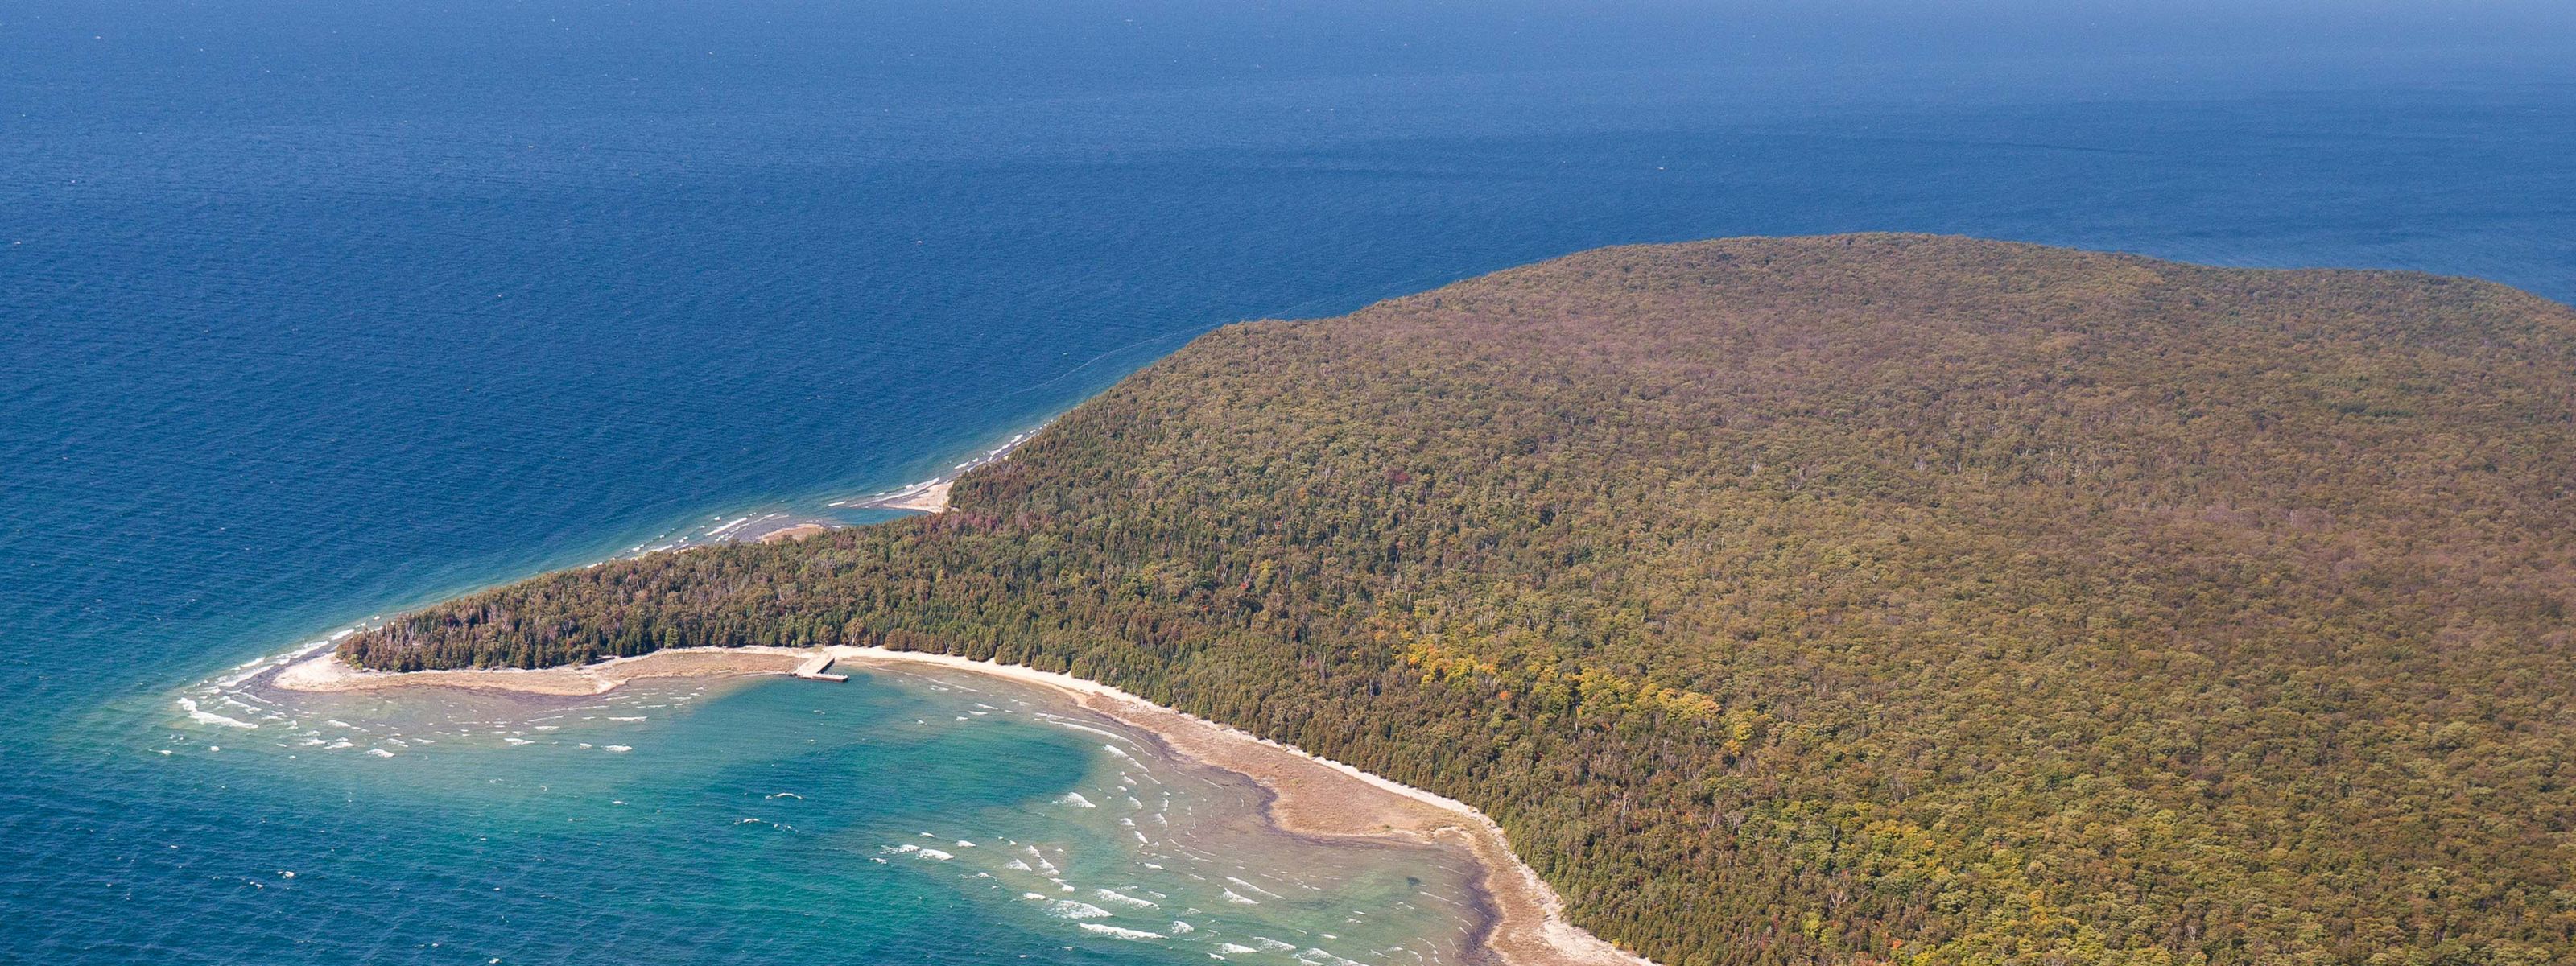 Aerial view of a peninsula covered in dense forest and a blue ocean surrounding it.